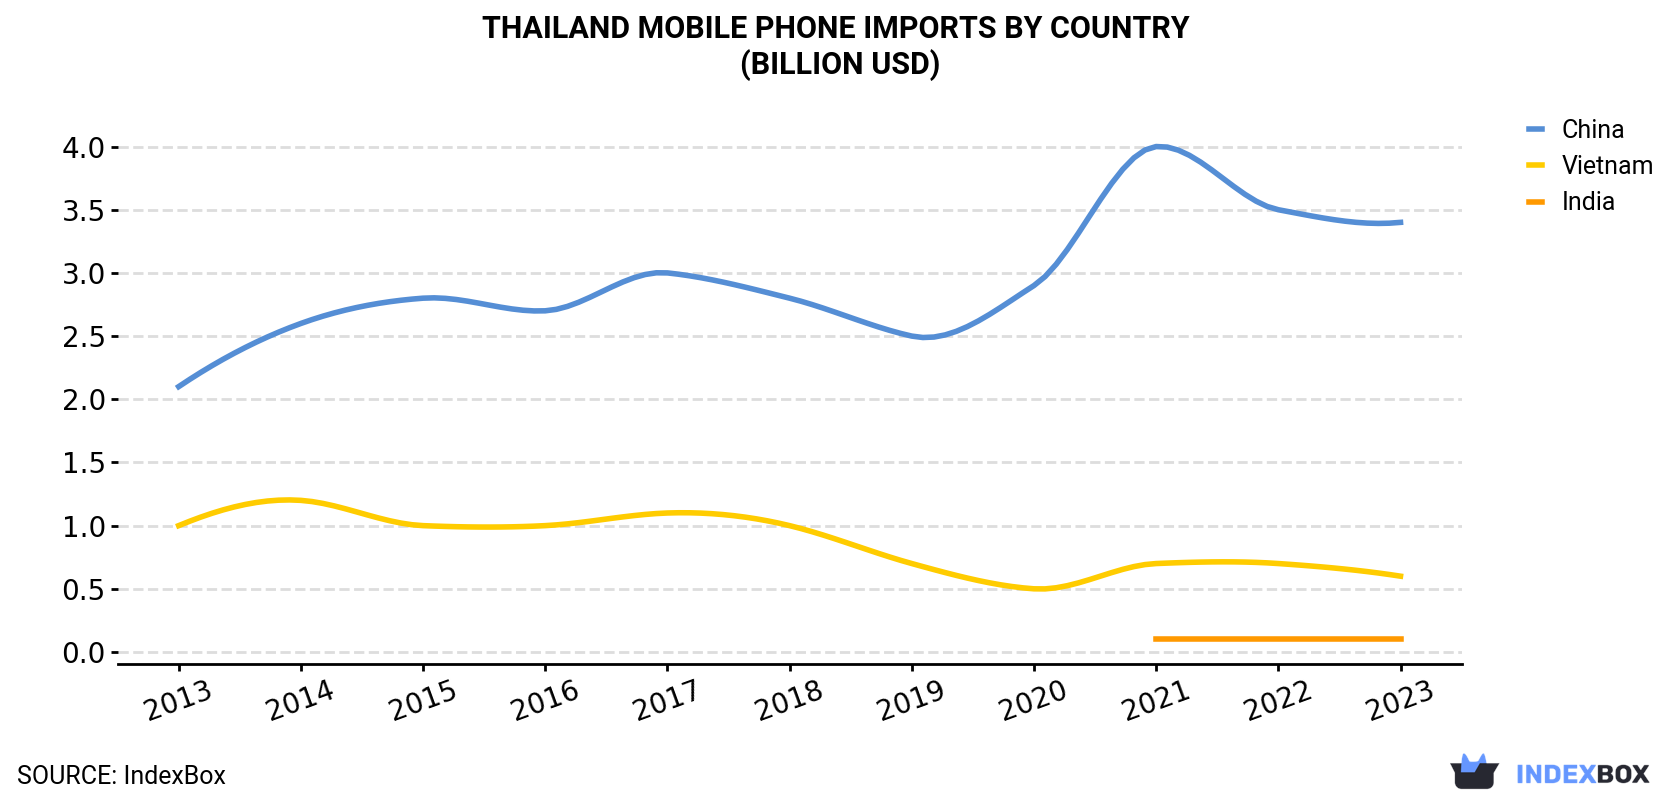 Thailand Mobile Phone Imports By Country (Billion USD)